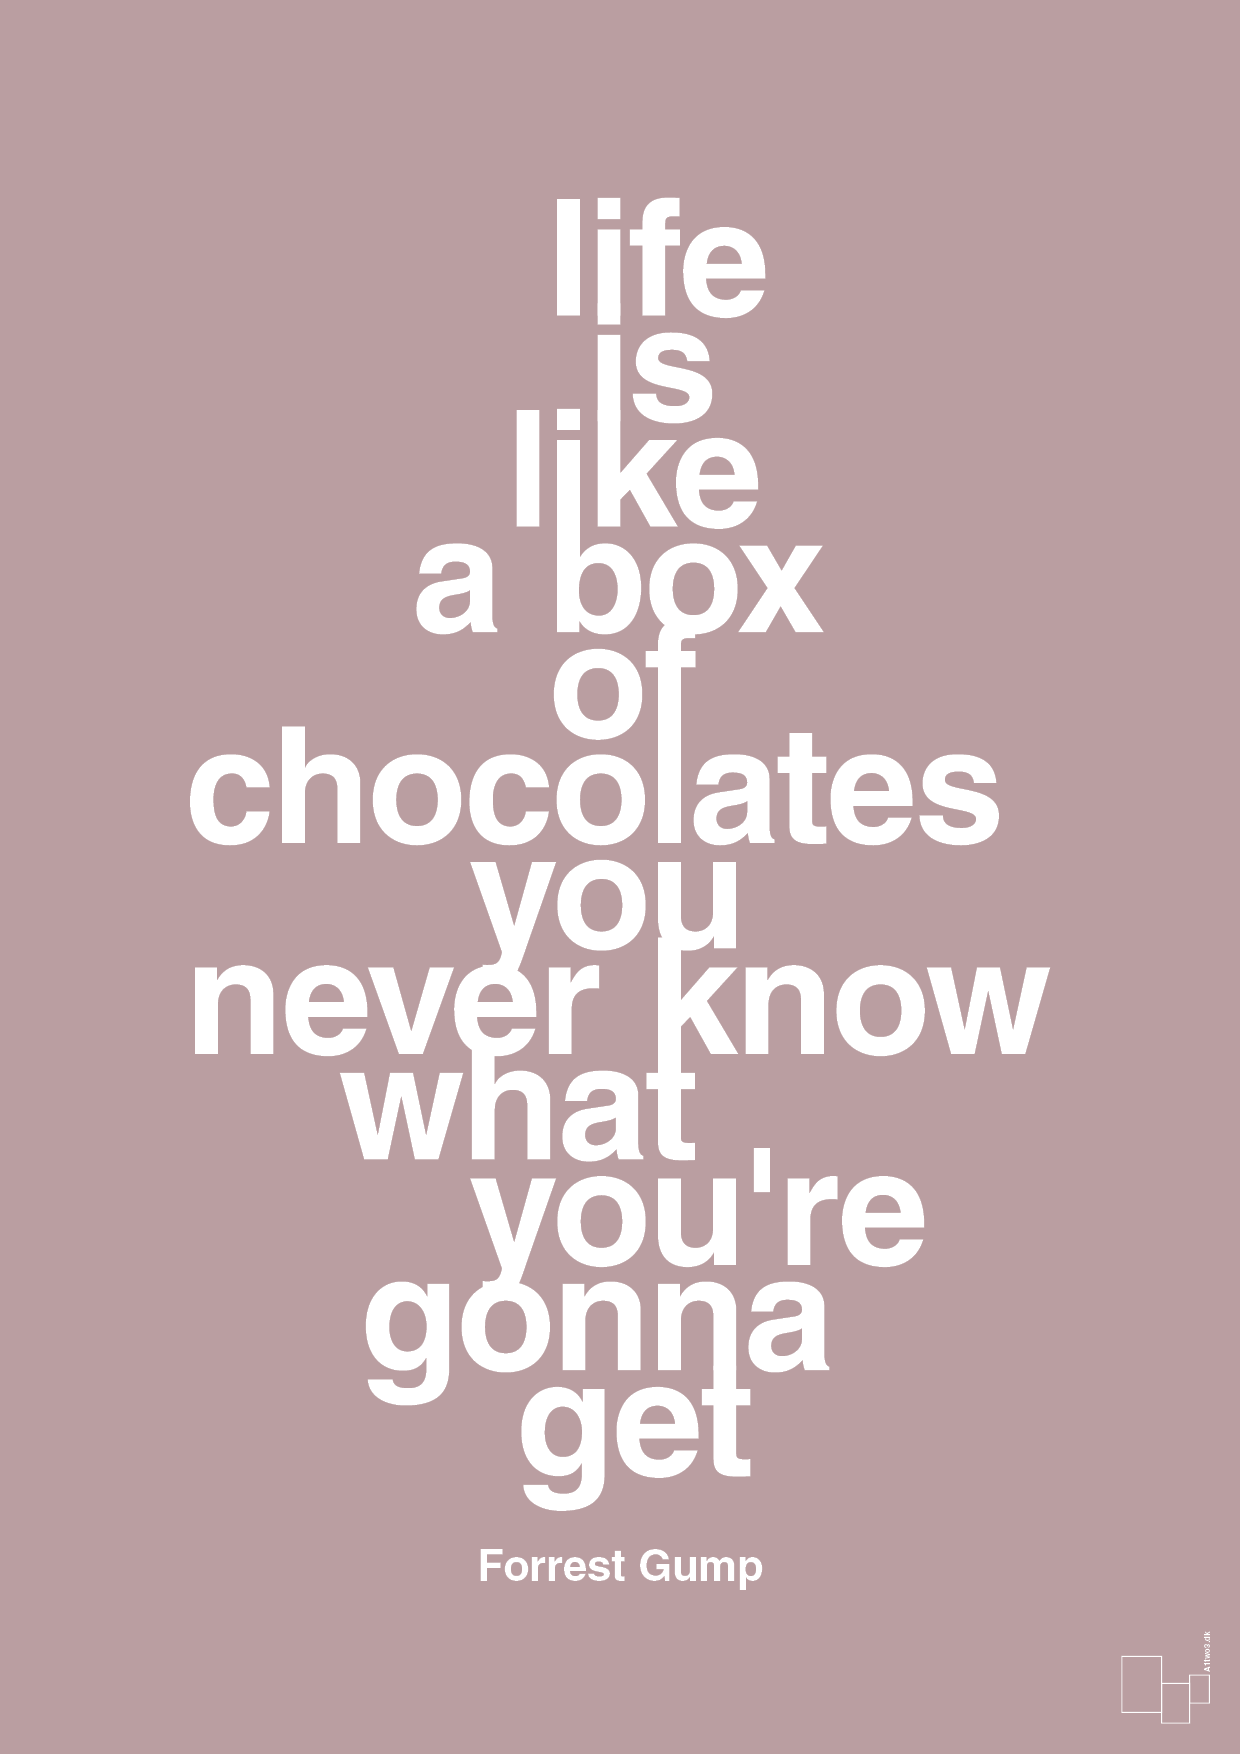 life is like a box of chocolates you never know what you're gonna get - Plakat med Citater i Light Rose